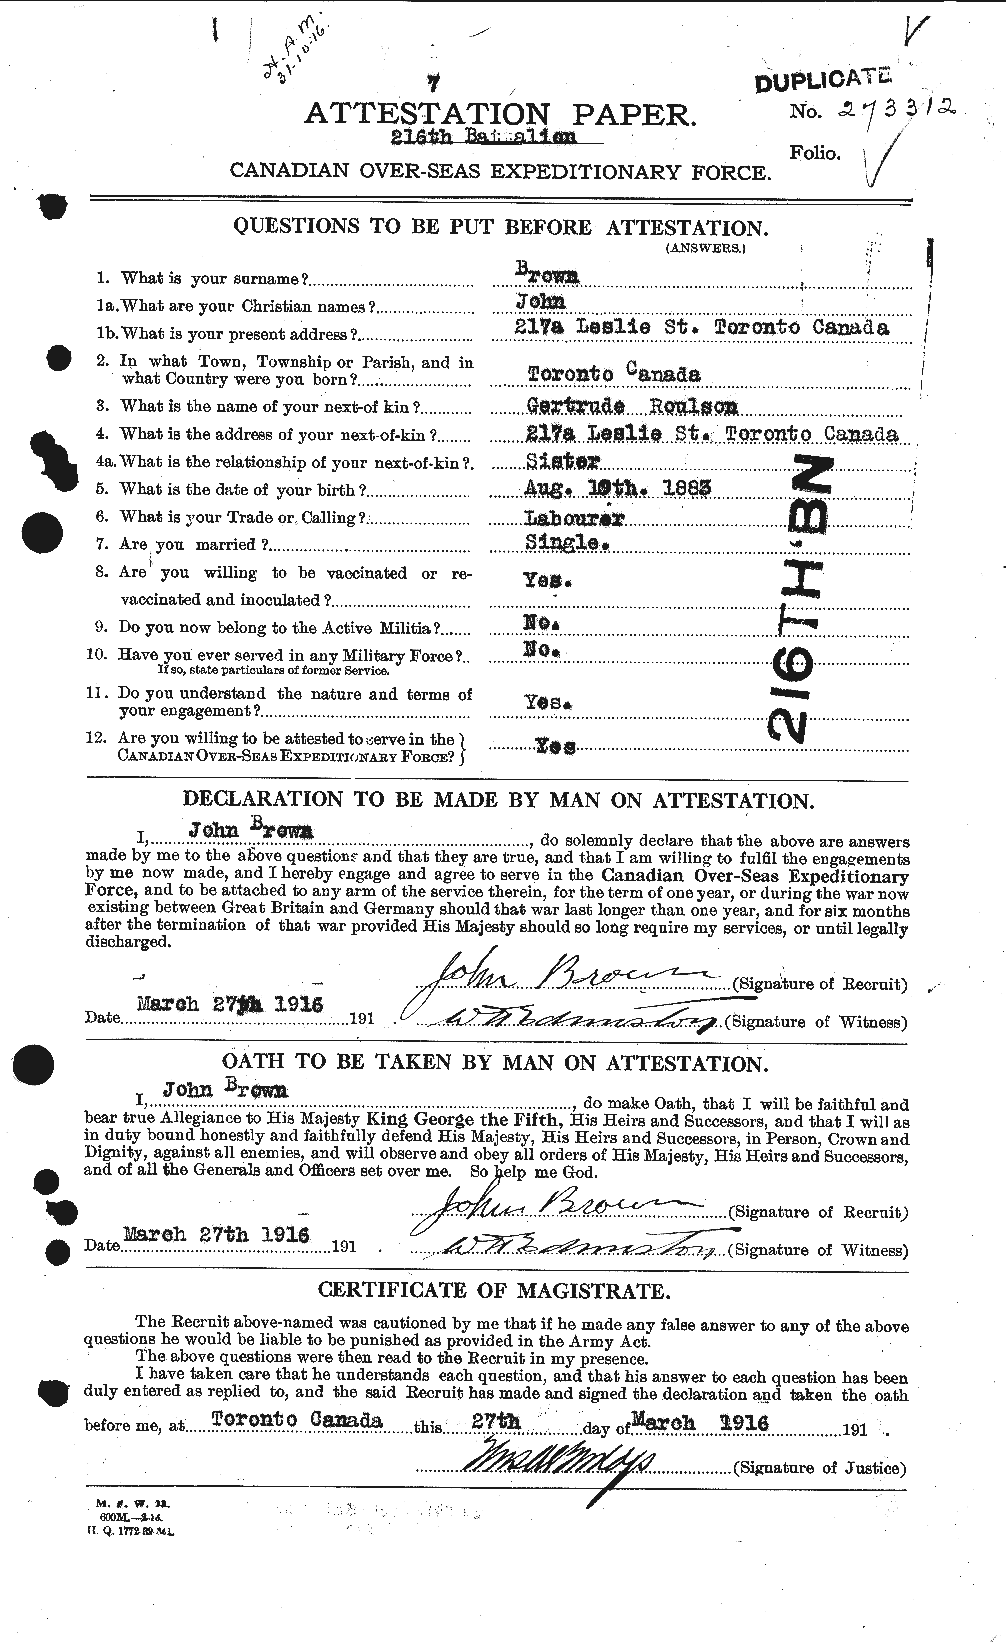 Personnel Records of the First World War - CEF 264550a